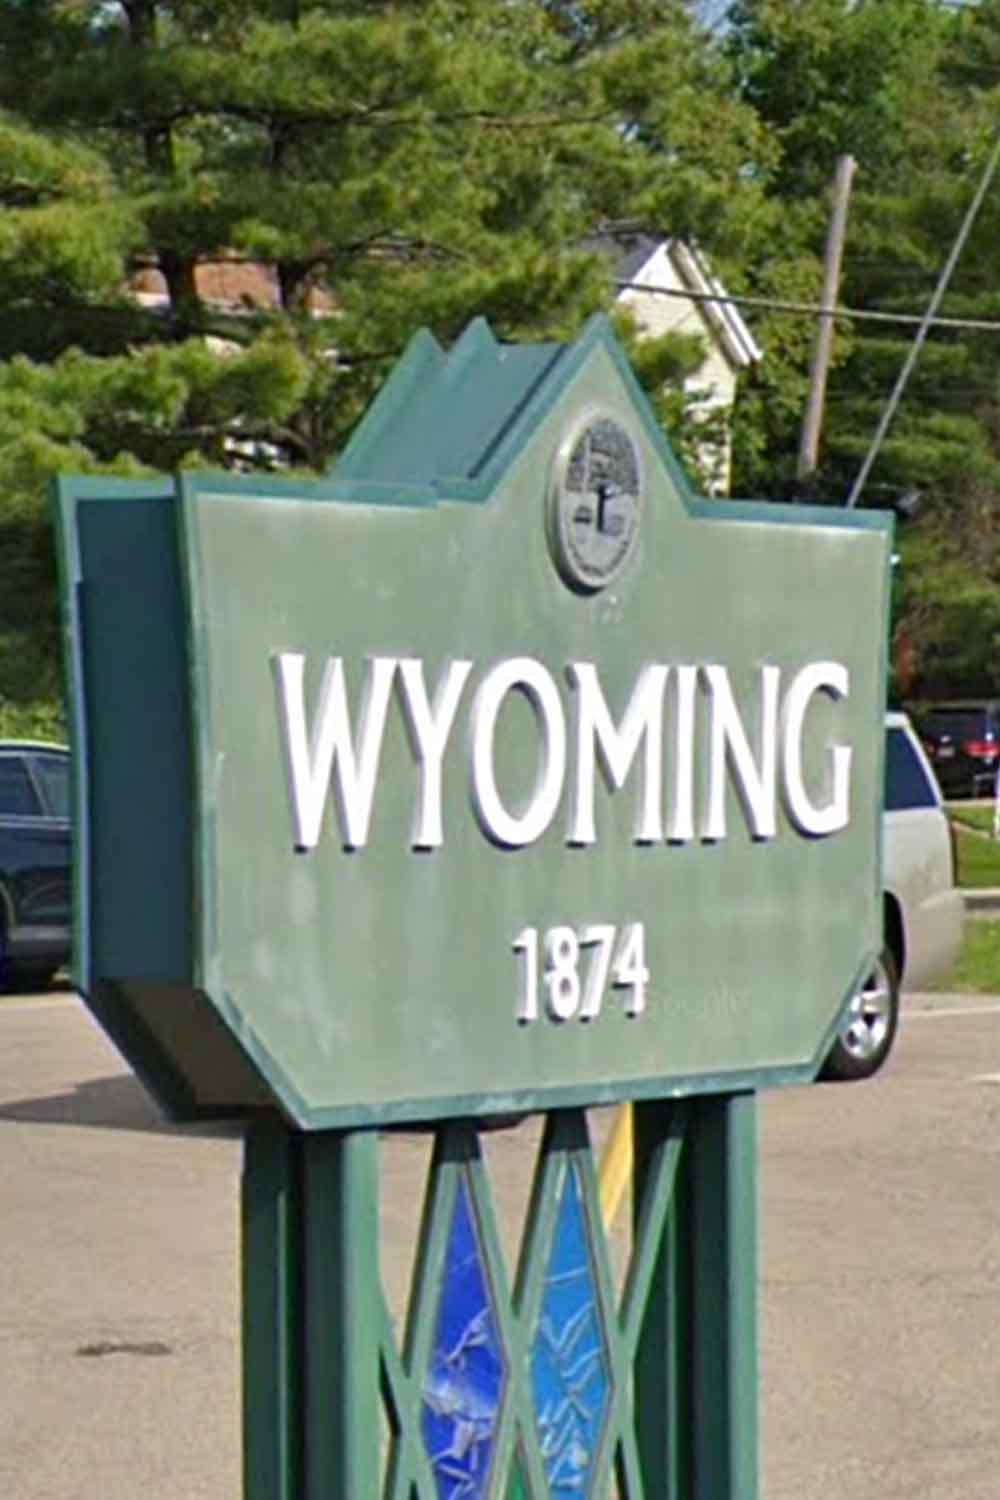 Wyoming Heating & Cooling services